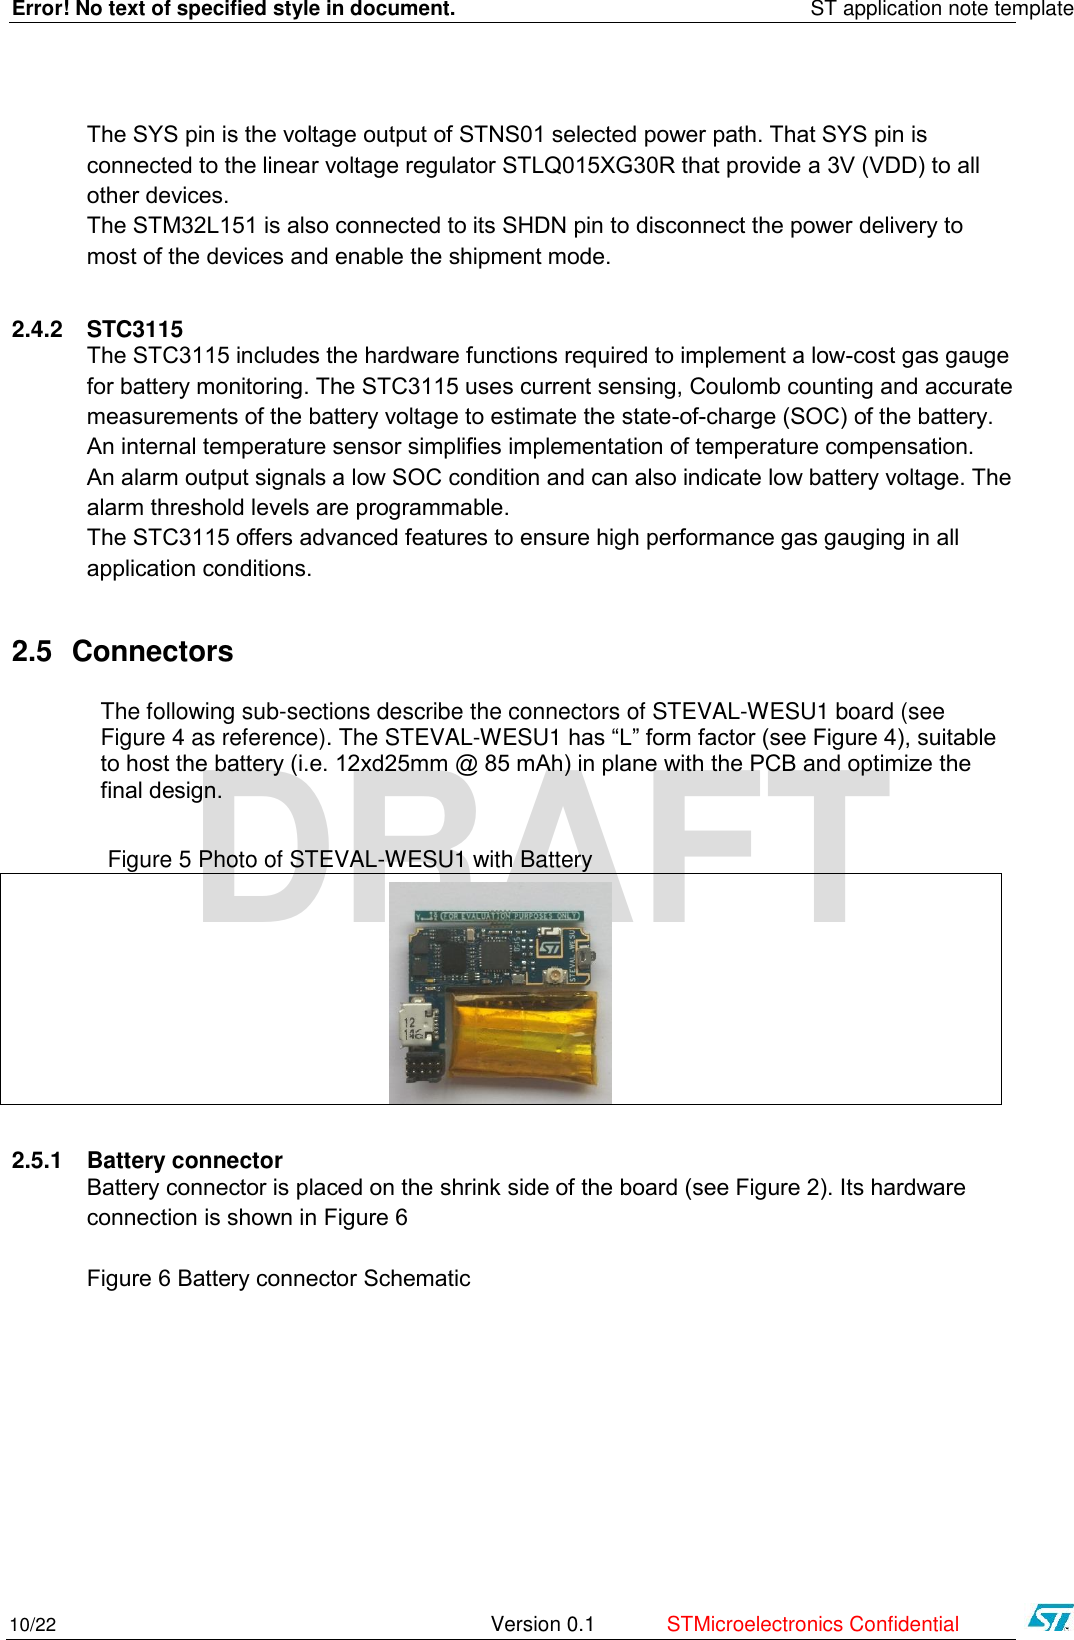 Error! No text of specified style in document.    ST application note template 10/22   Version 0.1  STMicroelectronics Confidential   DRAFT The SYS pin is the voltage output of STNS01 selected power path. That SYS pin is connected to the linear voltage regulator STLQ015XG30R that provide a 3V (VDD) to all other devices. The STM32L151 is also connected to its SHDN pin to disconnect the power delivery to most of the devices and enable the shipment mode.  2.4.2 STC3115 The STC3115 includes the hardware functions required to implement a low-cost gas gauge for battery monitoring. The STC3115 uses current sensing, Coulomb counting and accurate measurements of the battery voltage to estimate the state-of-charge (SOC) of the battery. An internal temperature sensor simplifies implementation of temperature compensation. An alarm output signals a low SOC condition and can also indicate low battery voltage. The alarm threshold levels are programmable. The STC3115 offers advanced features to ensure high performance gas gauging in all   application conditions. 2.5 Connectors The following sub-sections describe the connectors of STEVAL-WESU1 board (see Figure 4 as reference). The STEVAL-WESU1 has “L” form factor (see Figure 4), suitable to host the battery (i.e. 12xd25mm @ 85 mAh) in plane with the PCB and optimize the final design.                  Figure 5 Photo of STEVAL-WESU1 with Battery   2.5.1 Battery connector Battery connector is placed on the shrink side of the board (see Figure 2). Its hardware connection is shown in Figure 6  Figure 6 Battery connector Schematic 